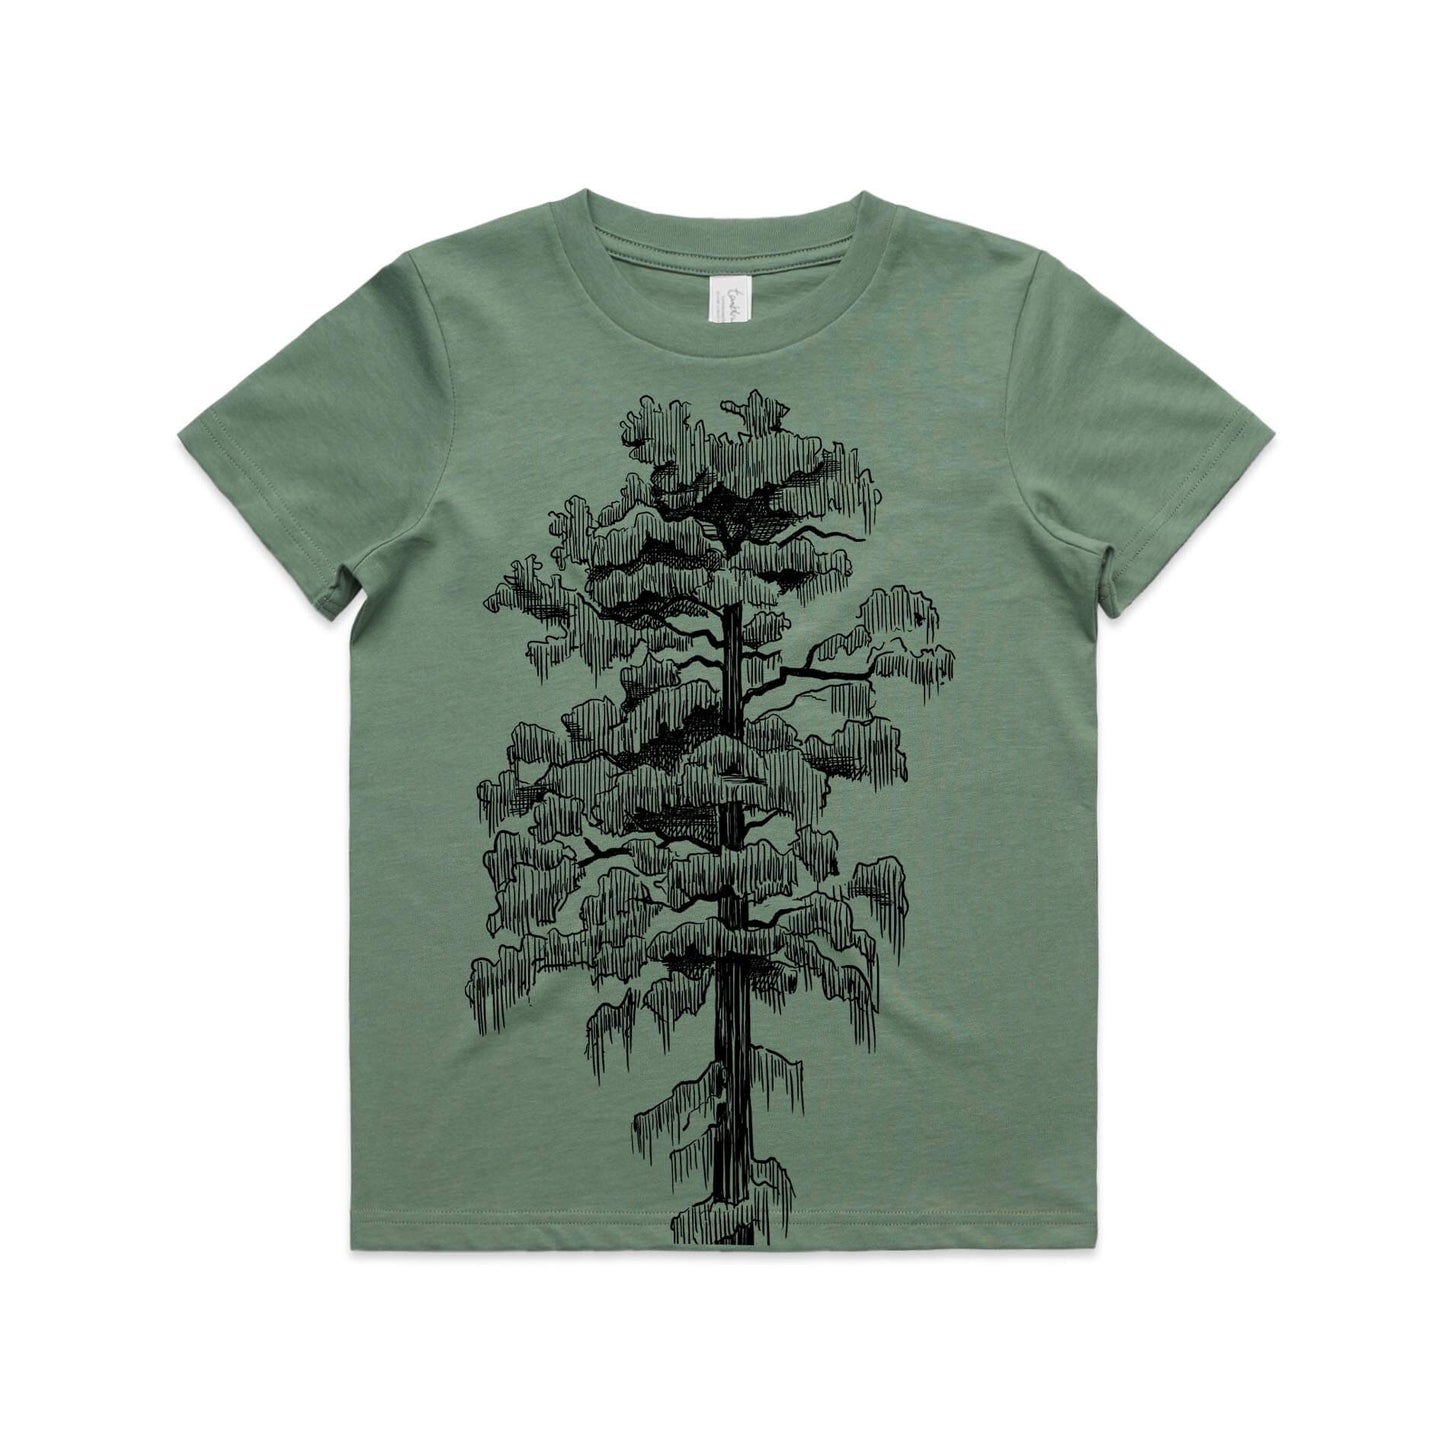 Sage, cotton kids' t-shirt with screen printed rimu design.